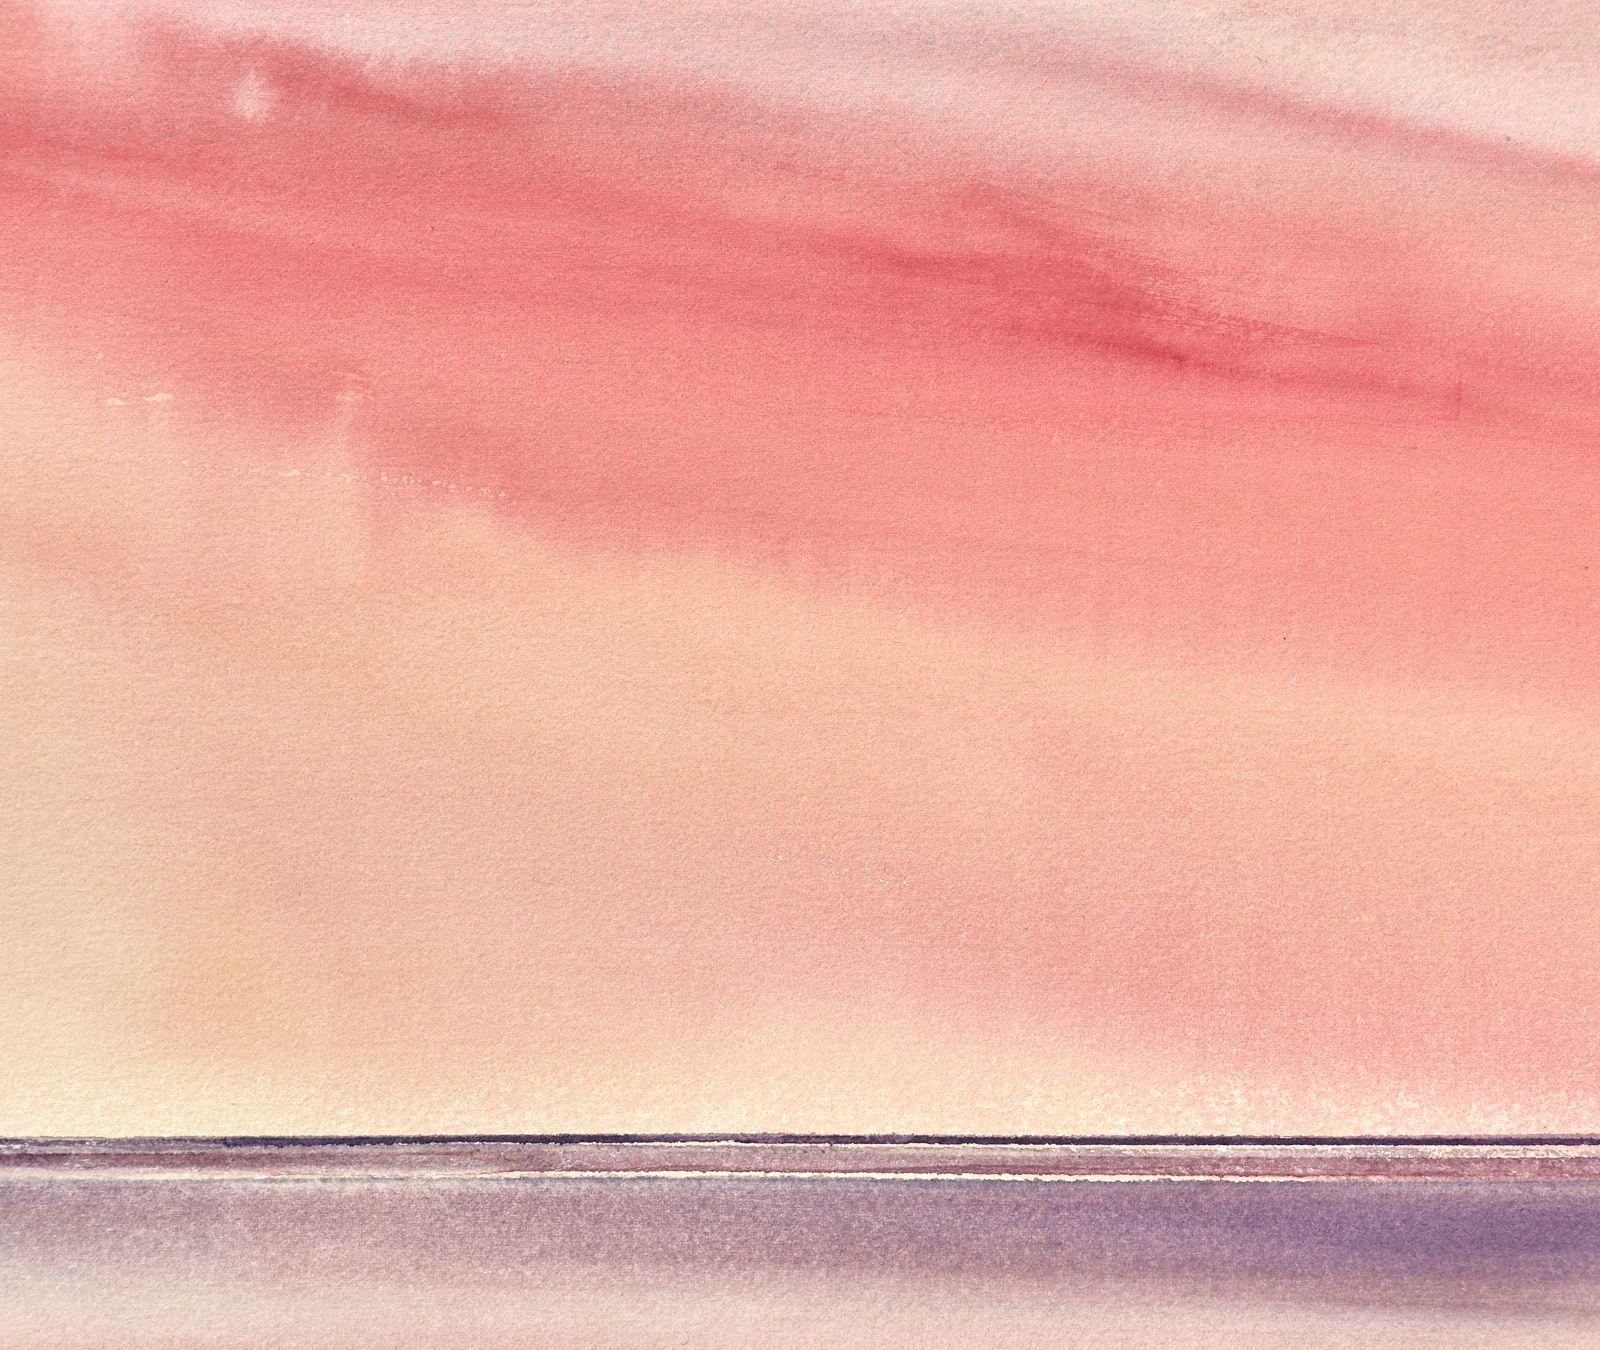 Twilight, Lytham St Annes Beach, Painting, Watercolor on Watercolor Paper - Contemporary Art by Timothy Gent